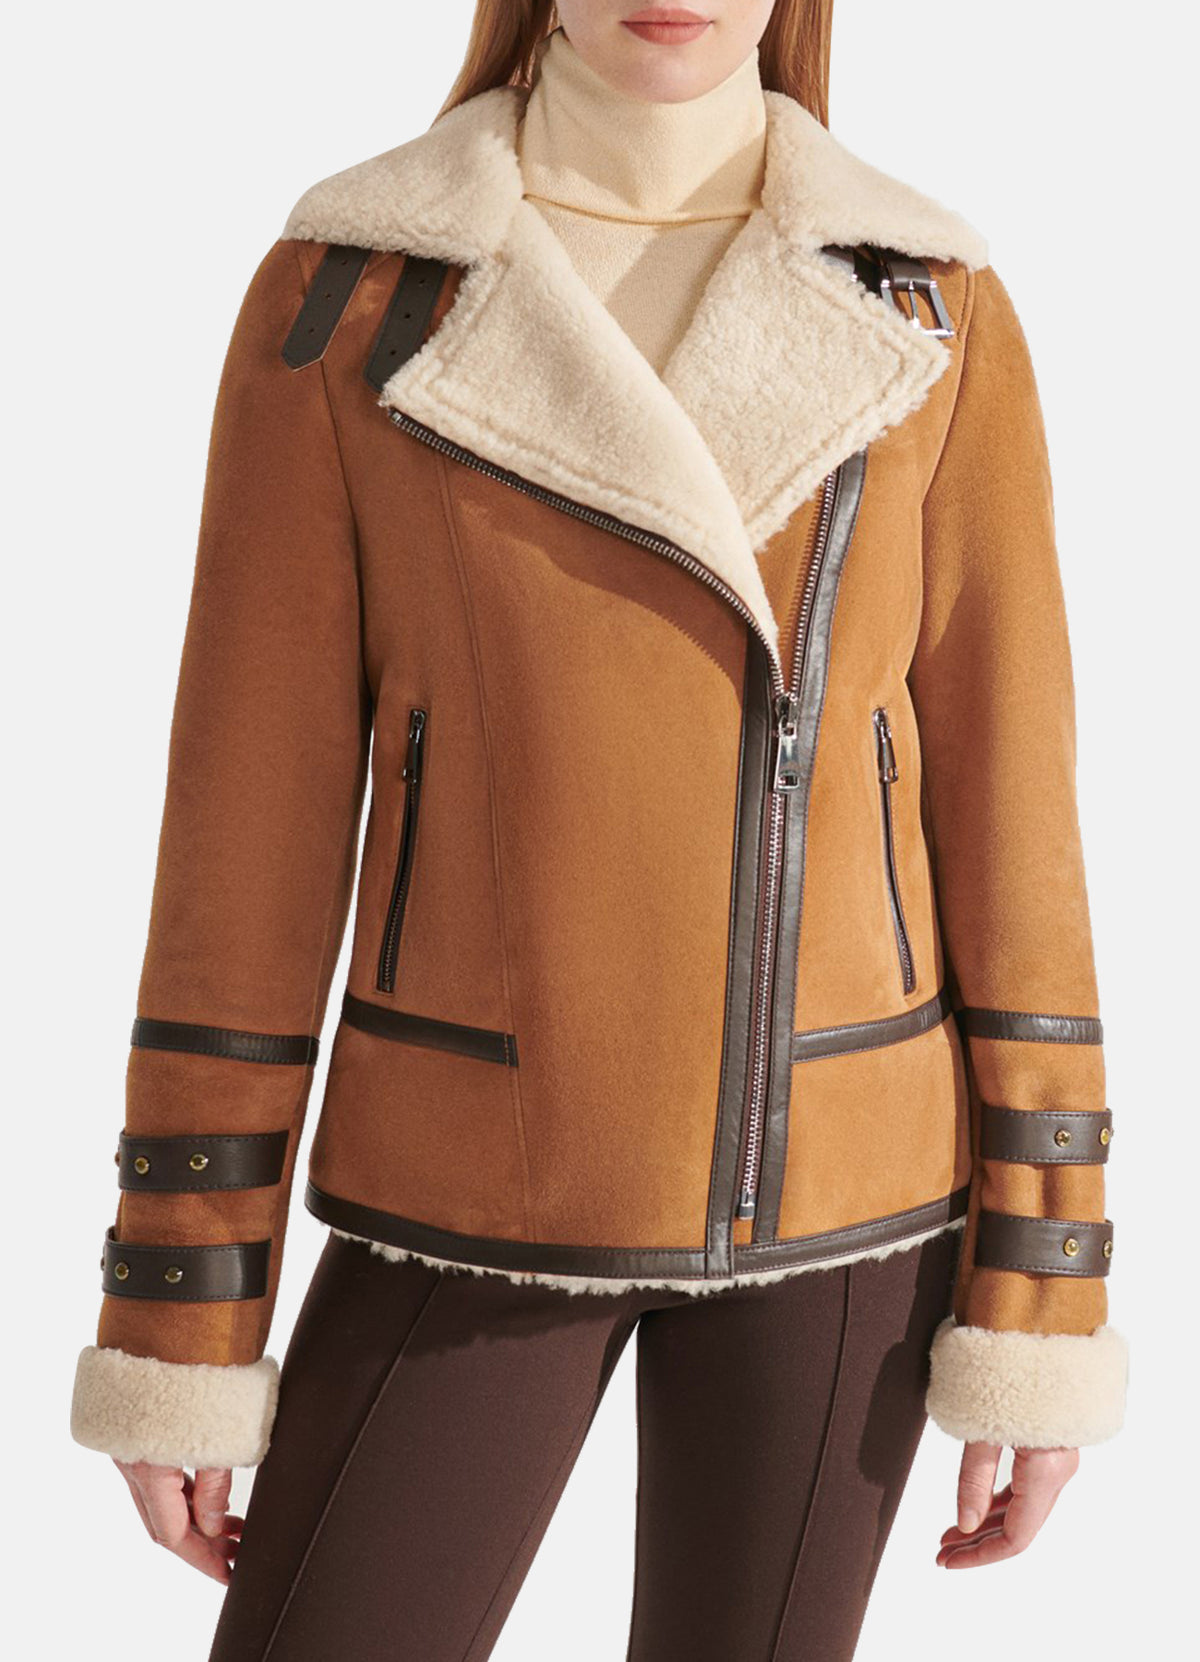 Womens Tan Suede Shearling Leather Jacket